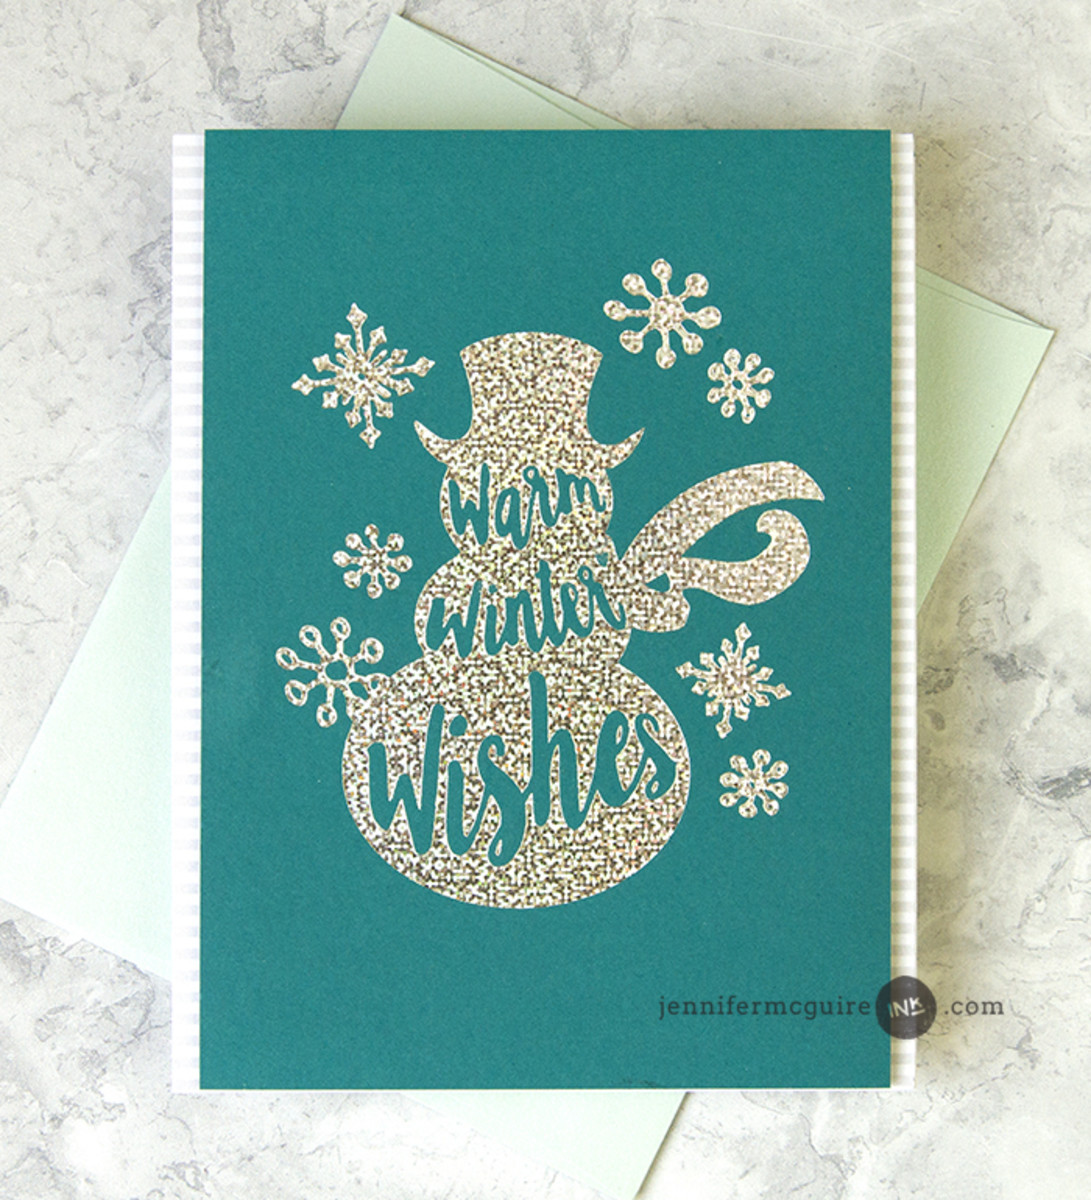 This elegant, foiled holiday is a perfect way to send greeting to your friends and families